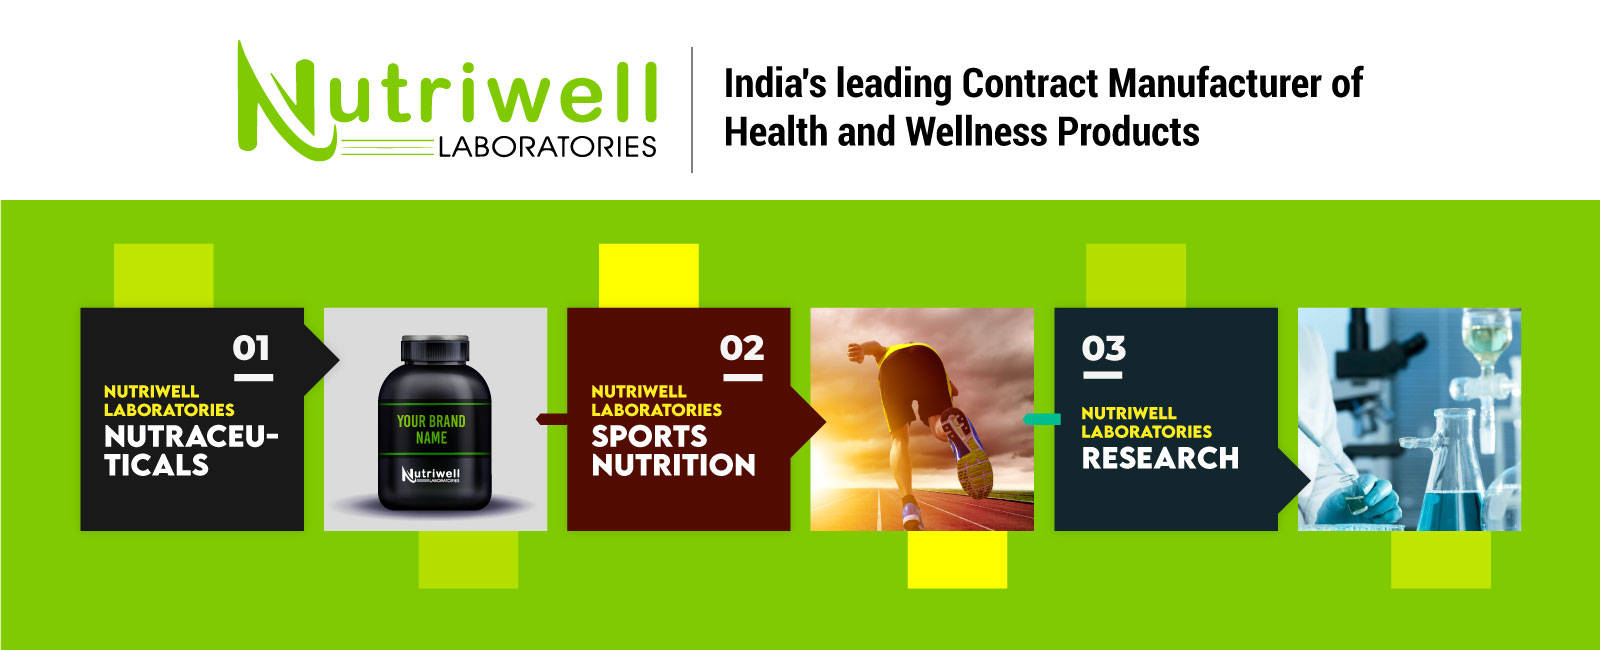 nutriwell laboratories protein powder manufacturers in india